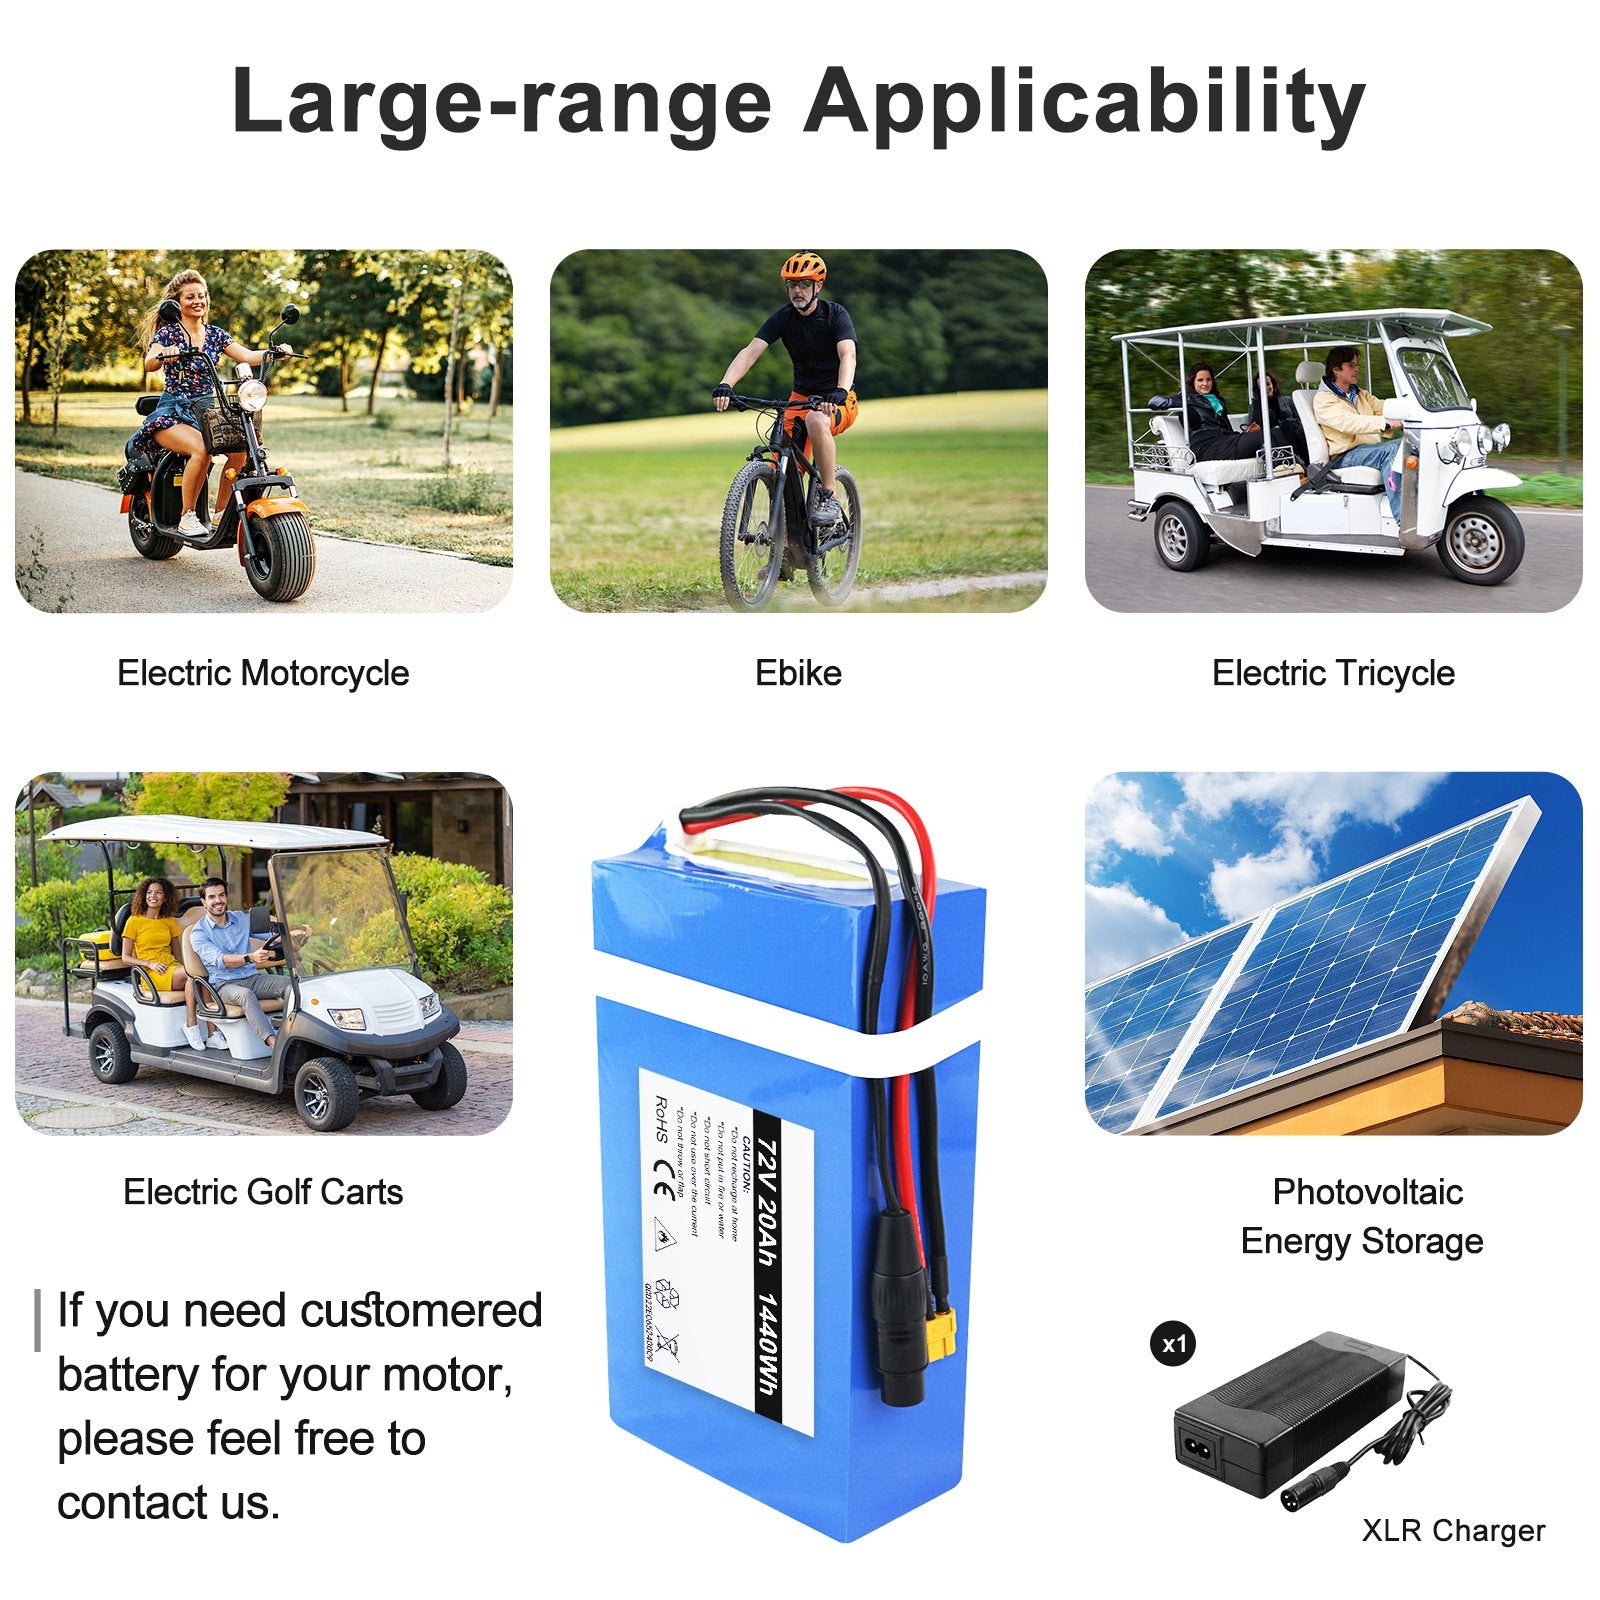 Waterproof 72V 20AH Ebike Battery with 60A BMS Protection for 3000W 2500W 2000W 1500W Ebike, Motorcycle, Scooter, Go Kart